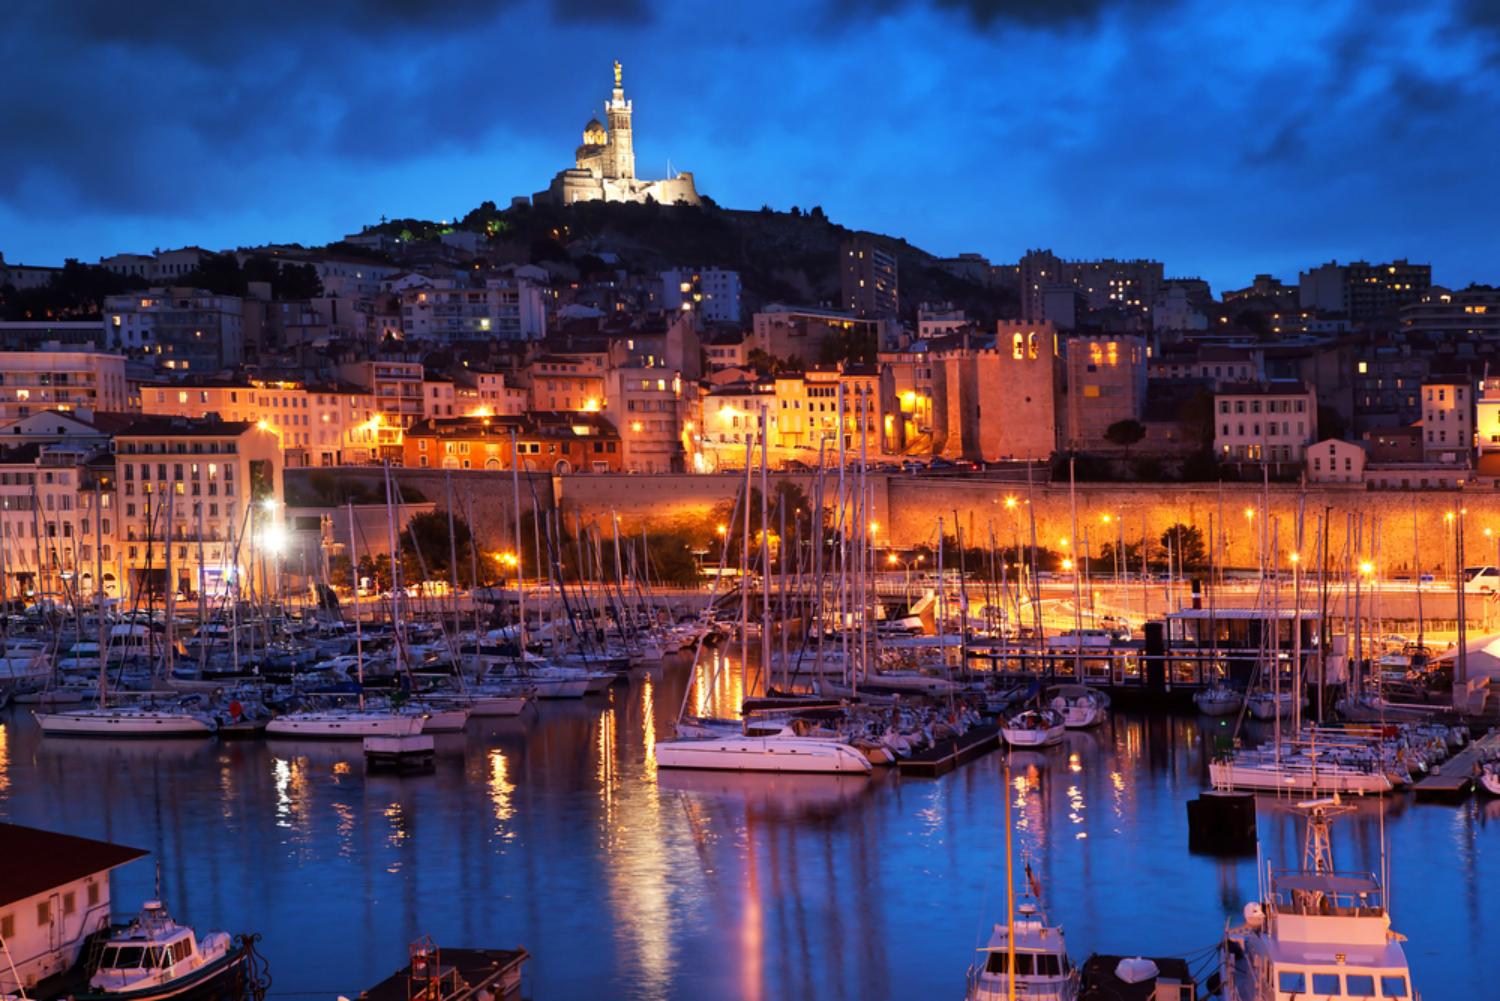 Private Transfer FROM Aix, Arles, Avignon, Cassis, Marseilles, Monaco, Nice, St Tropez or Toulon TO Marseilles (night, Sunday)